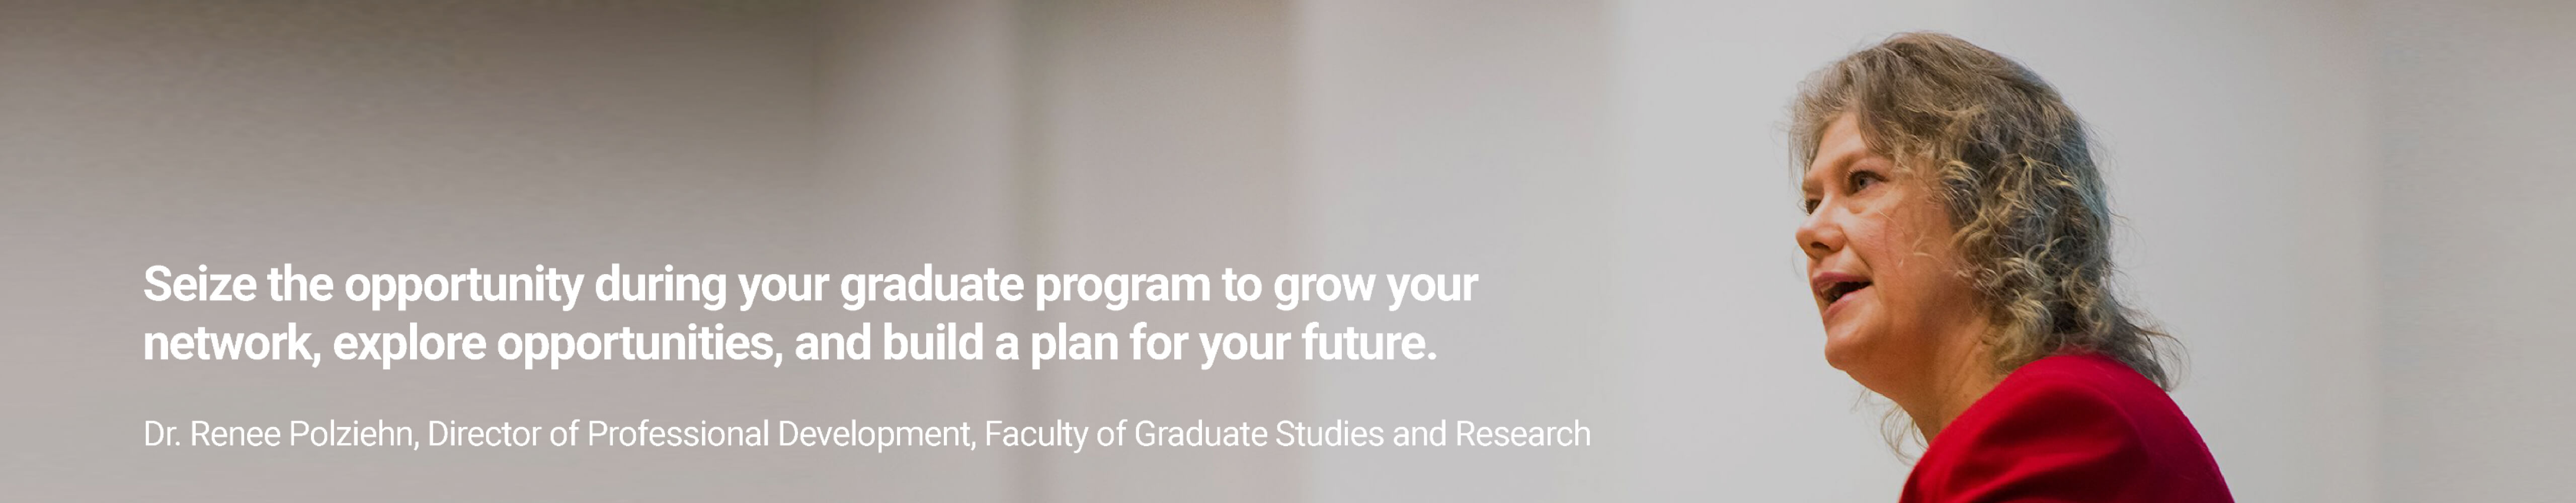 Seize the opportunity during your graduate program to grow your network, explore opportunities, and build a plan for your future. - Dr.Renee Polziehn, Director of Professional Development, Faculty of Graduate and Postdoctoral Studies